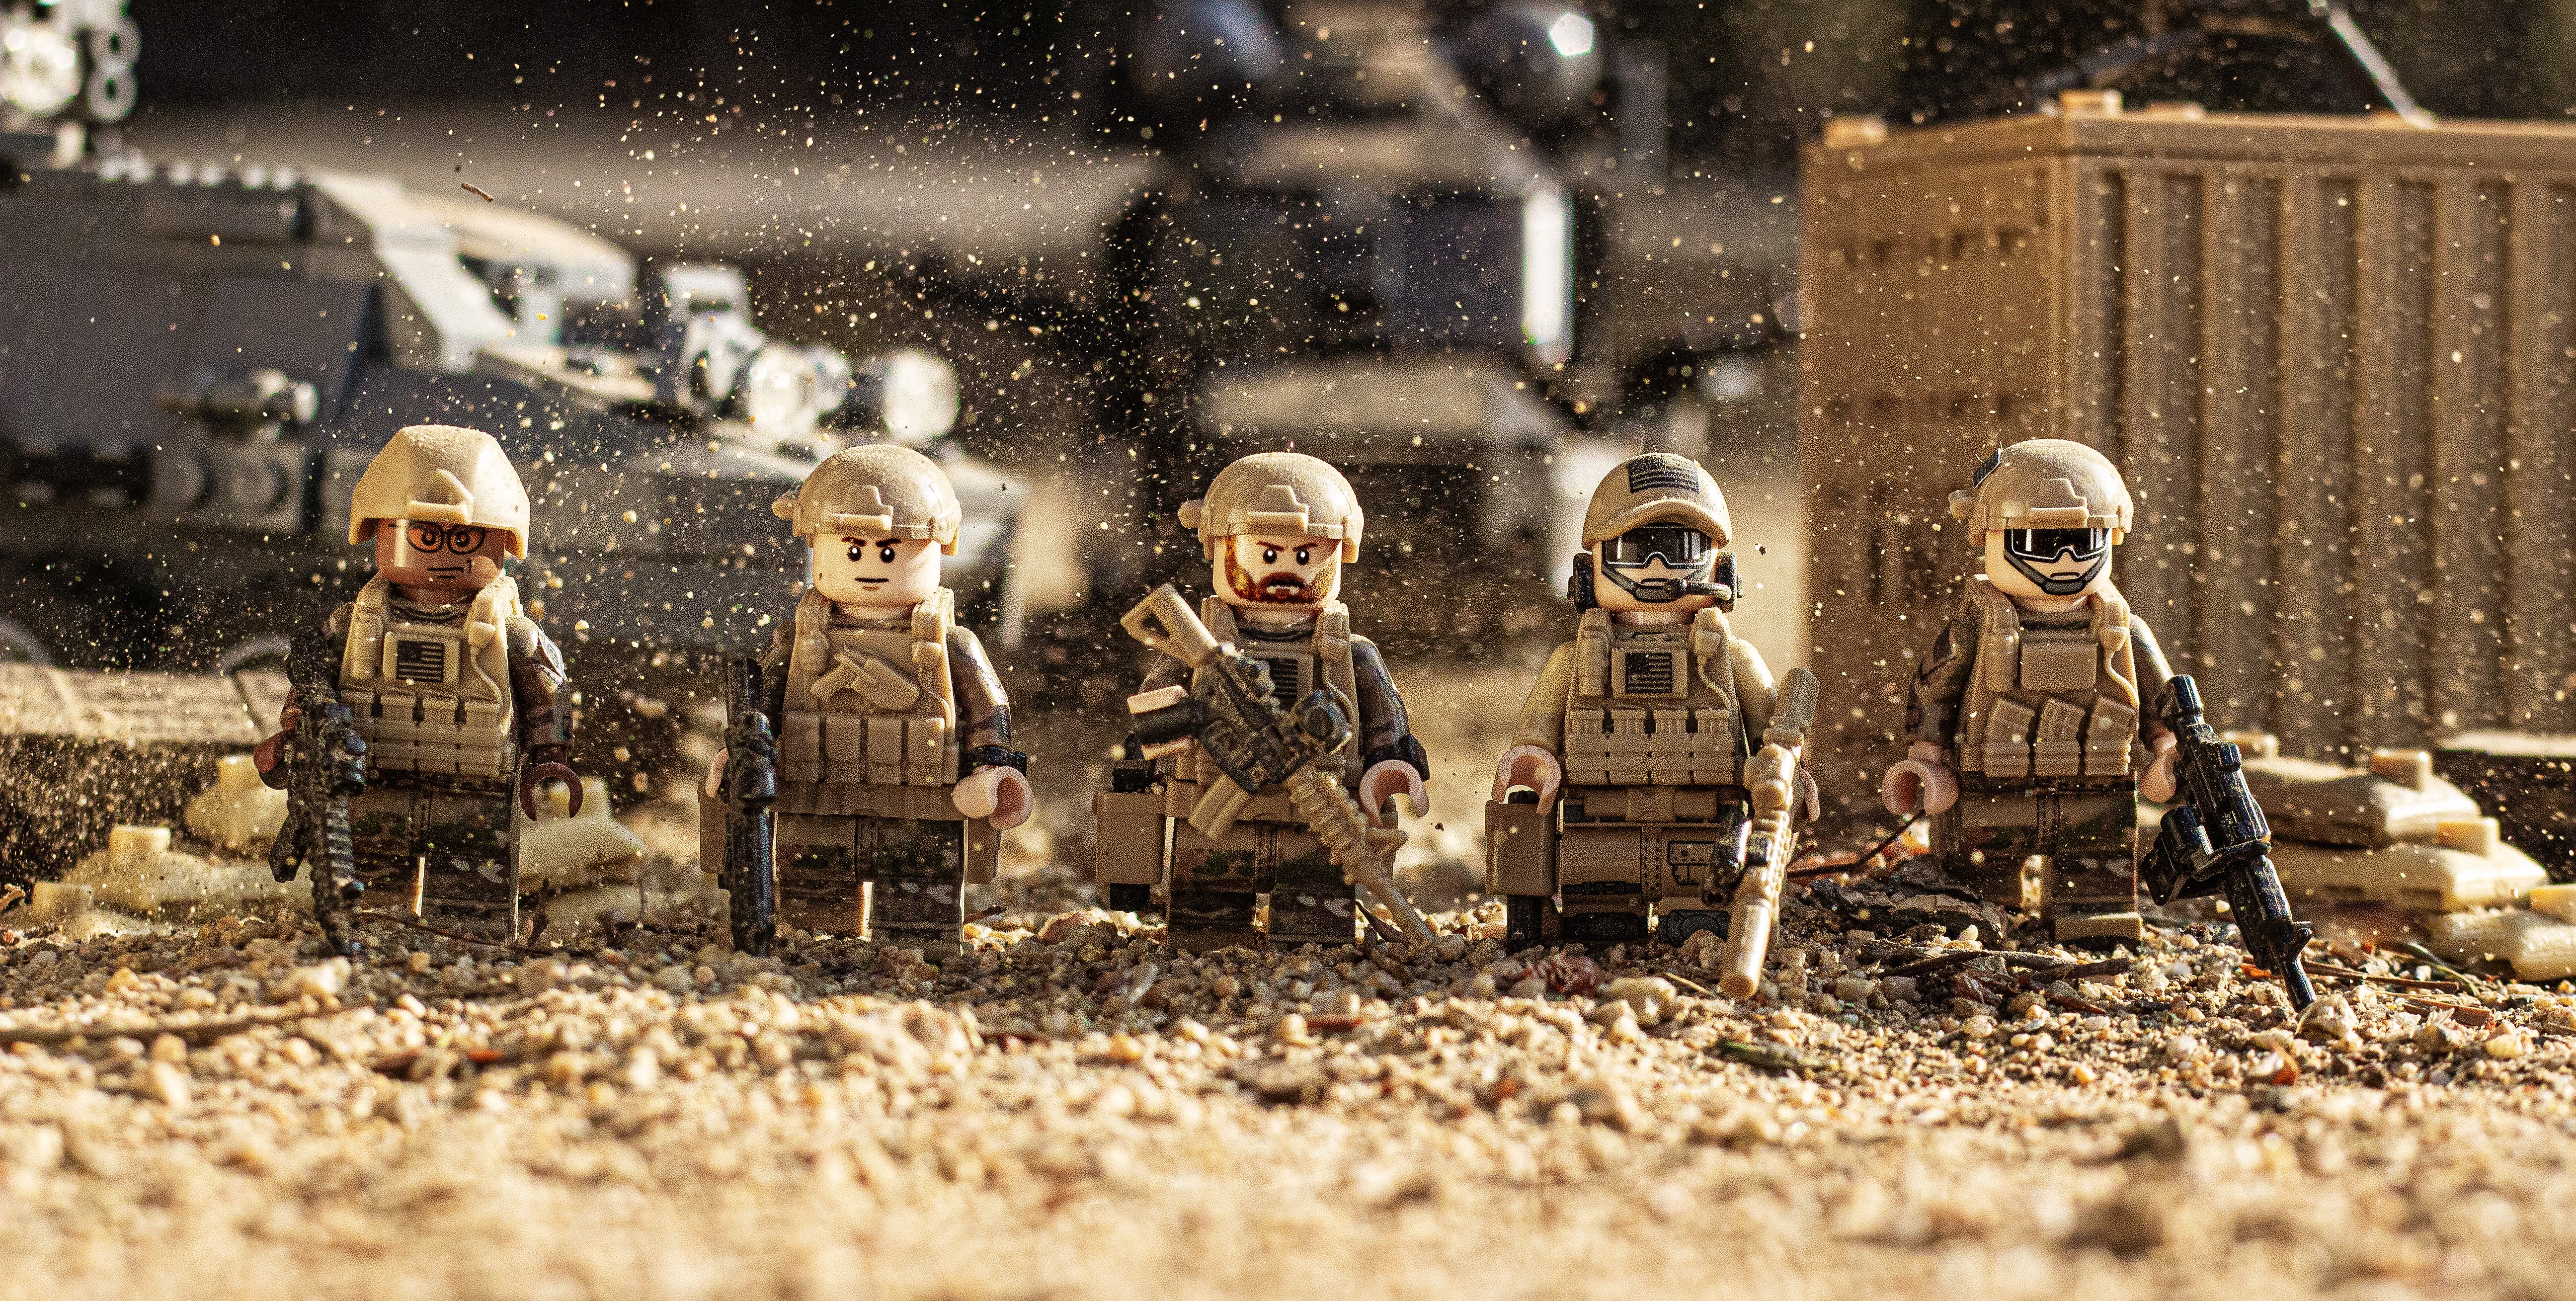 LEGO won't make modern war machines, but others are picking up the pieces